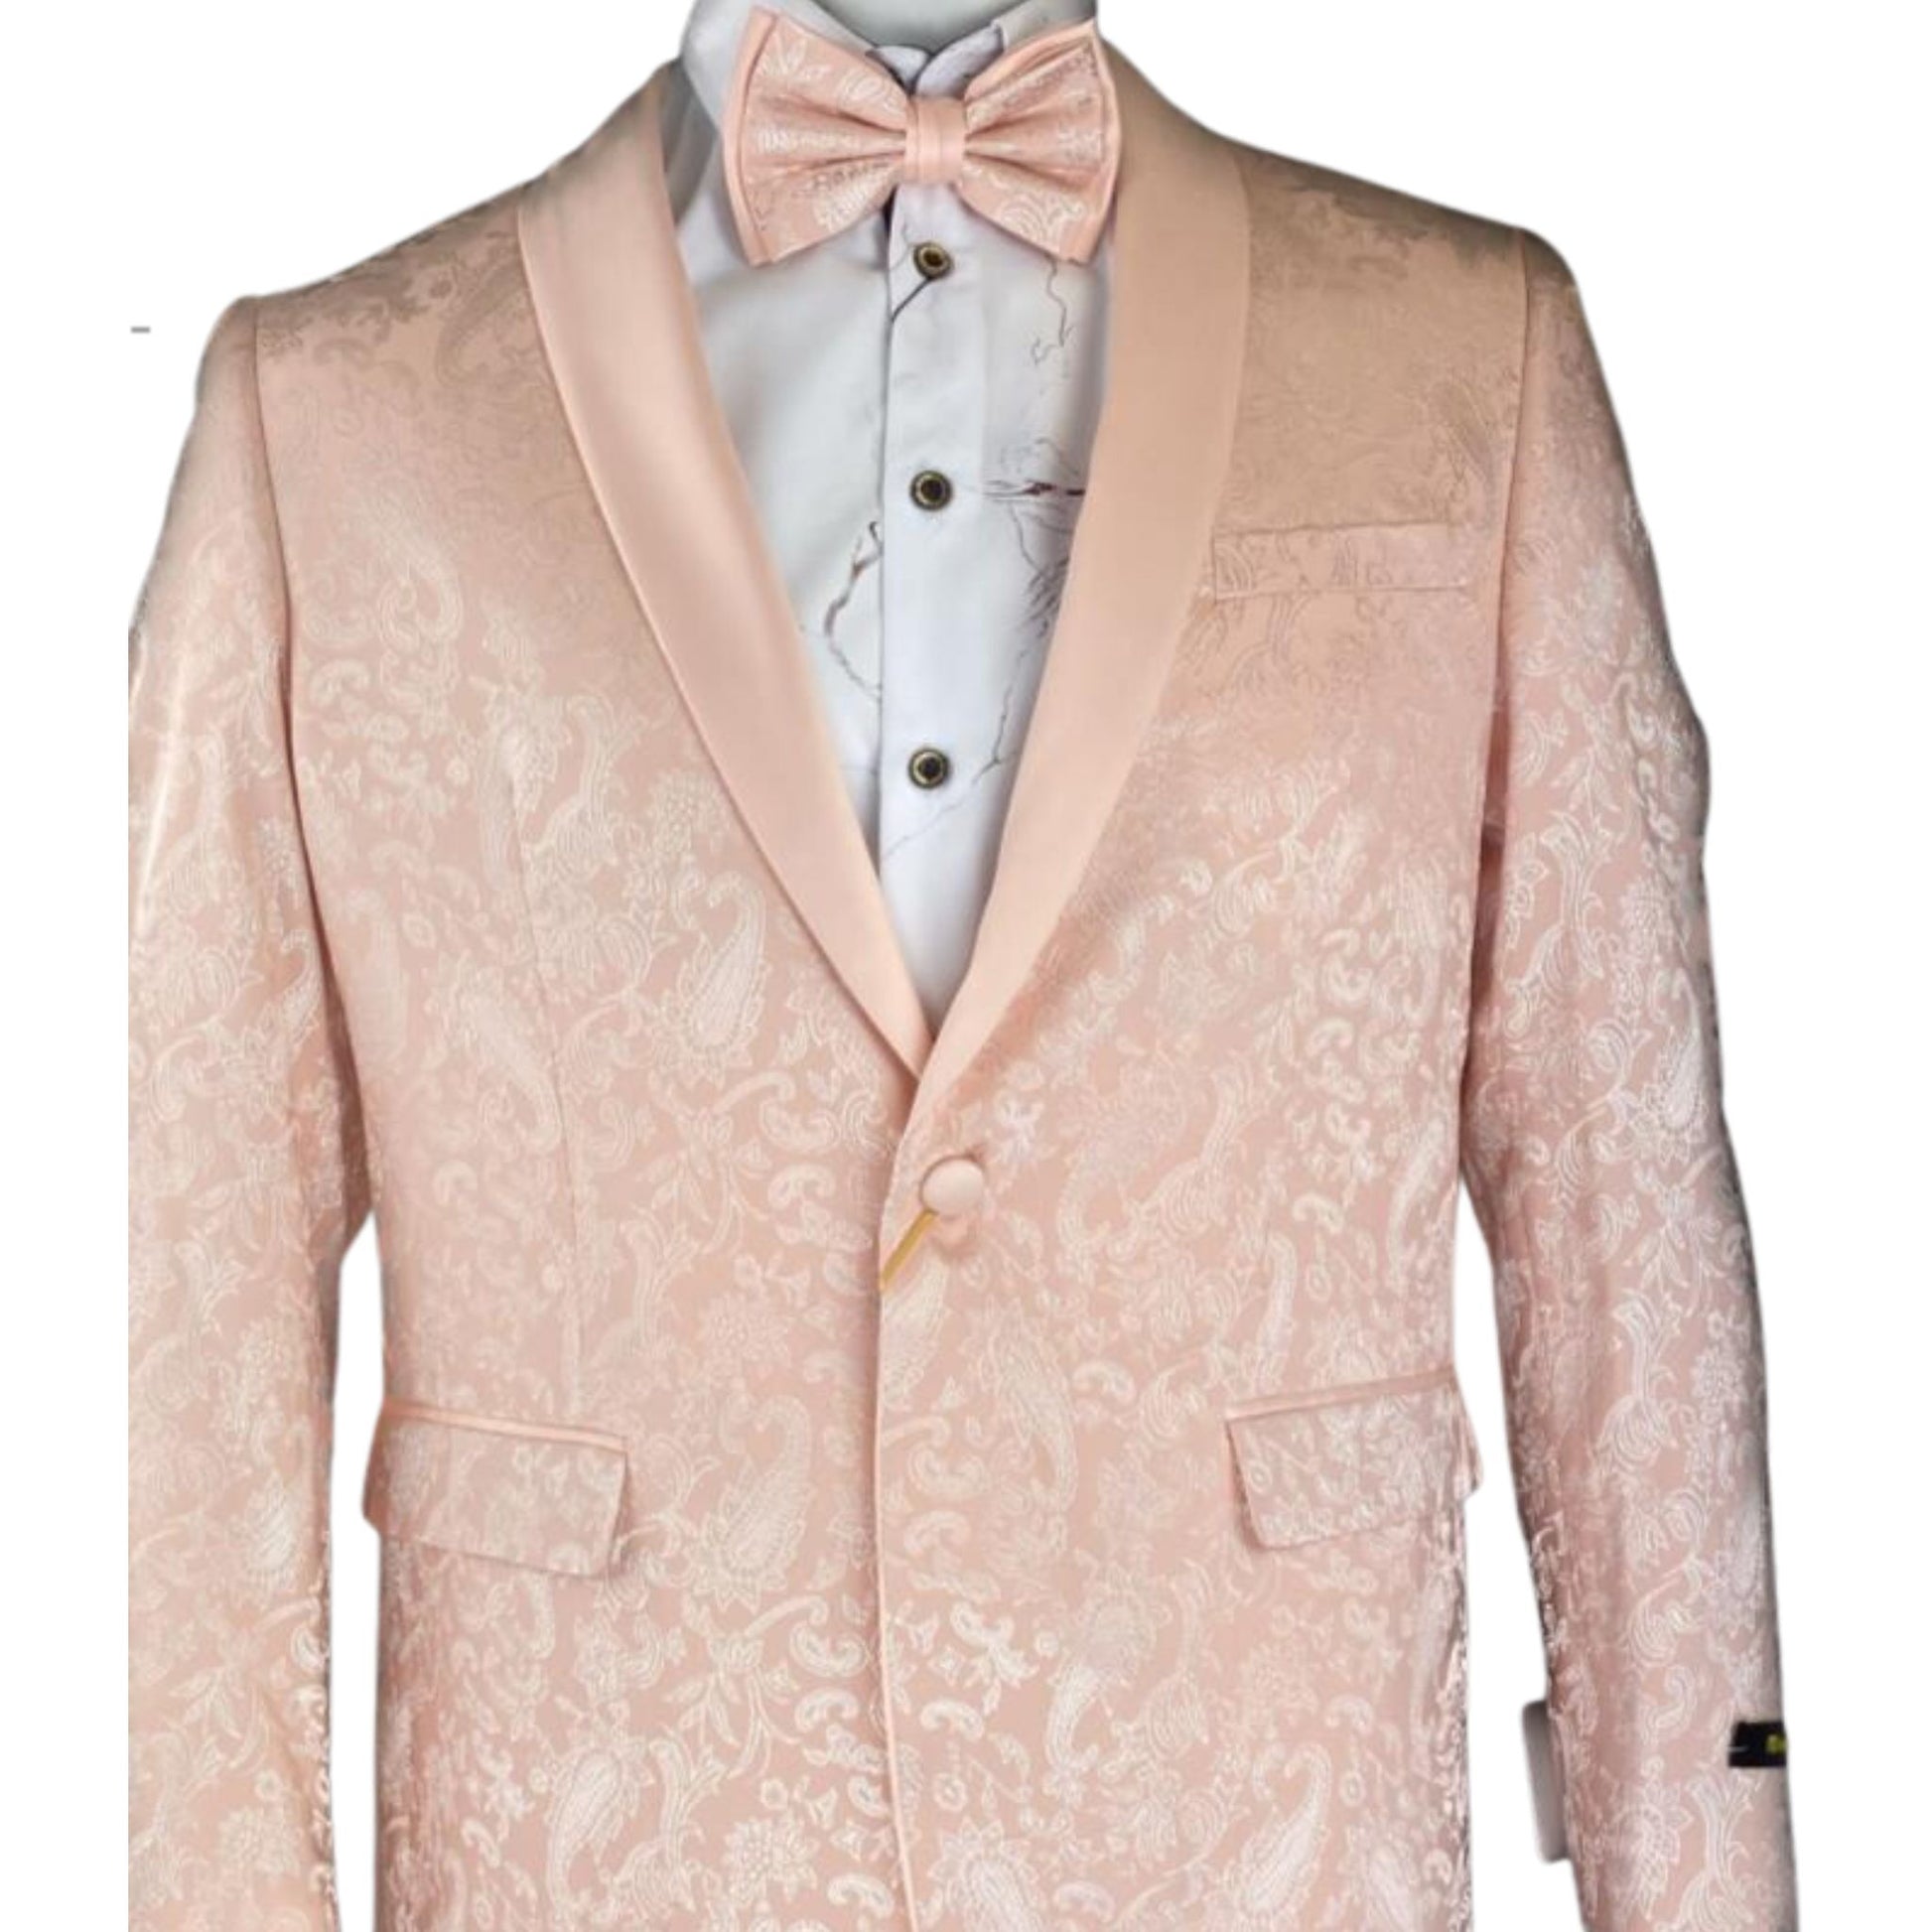 KCT Menswear's Rose Gold Paisley & Matching Bowtie with Black Shawl Lapel Prom Blazer, showcasing a lavish and unforgettable appearance for any formal occasion.